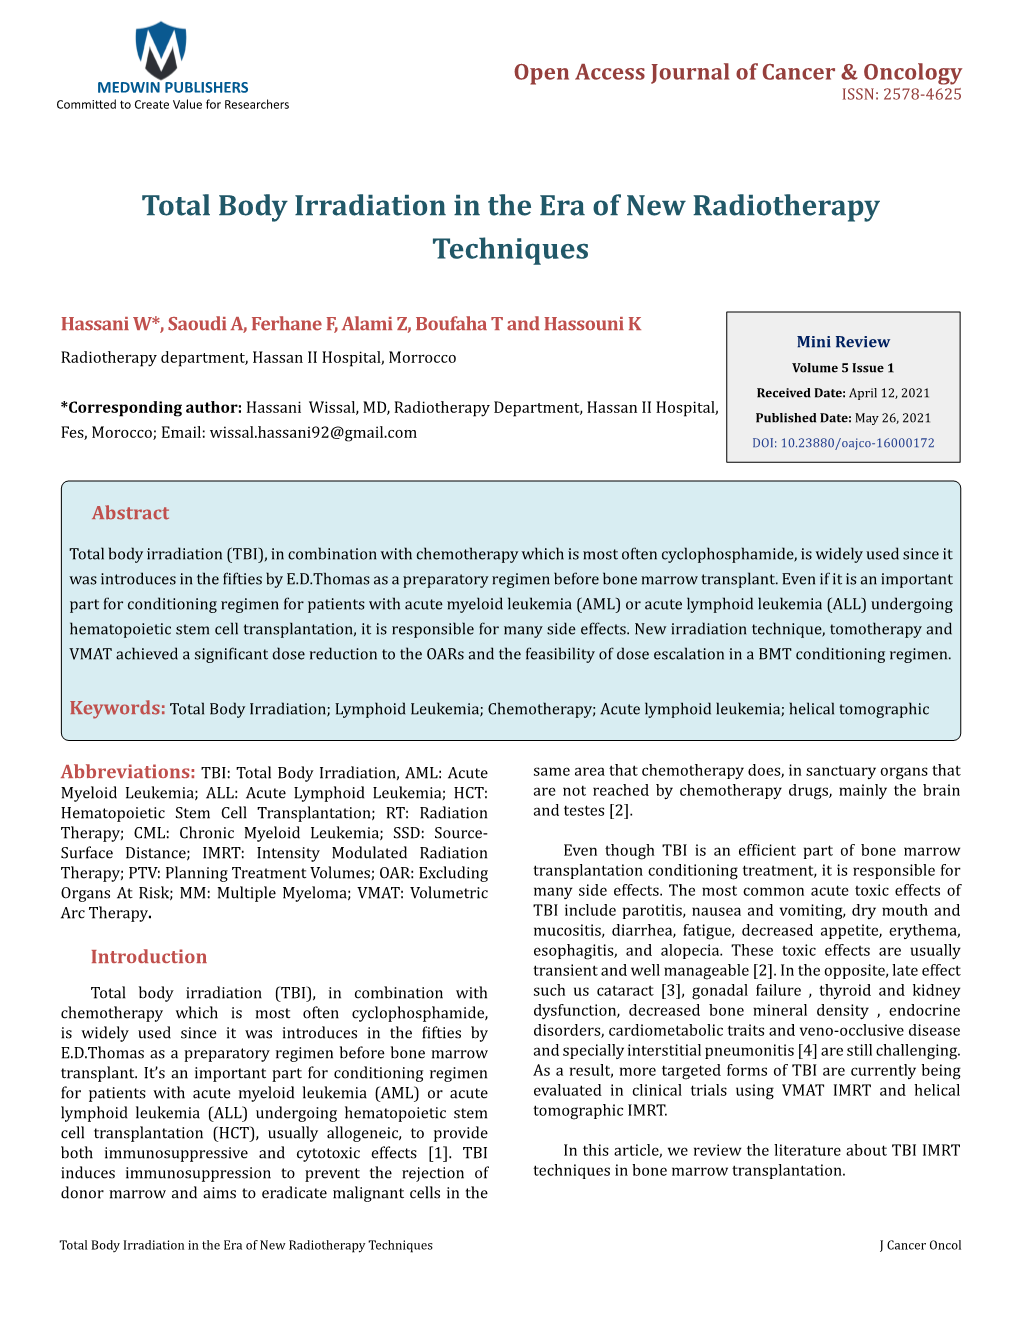 Total Body Irradiation in the Era of New Radiotherapy Techniques